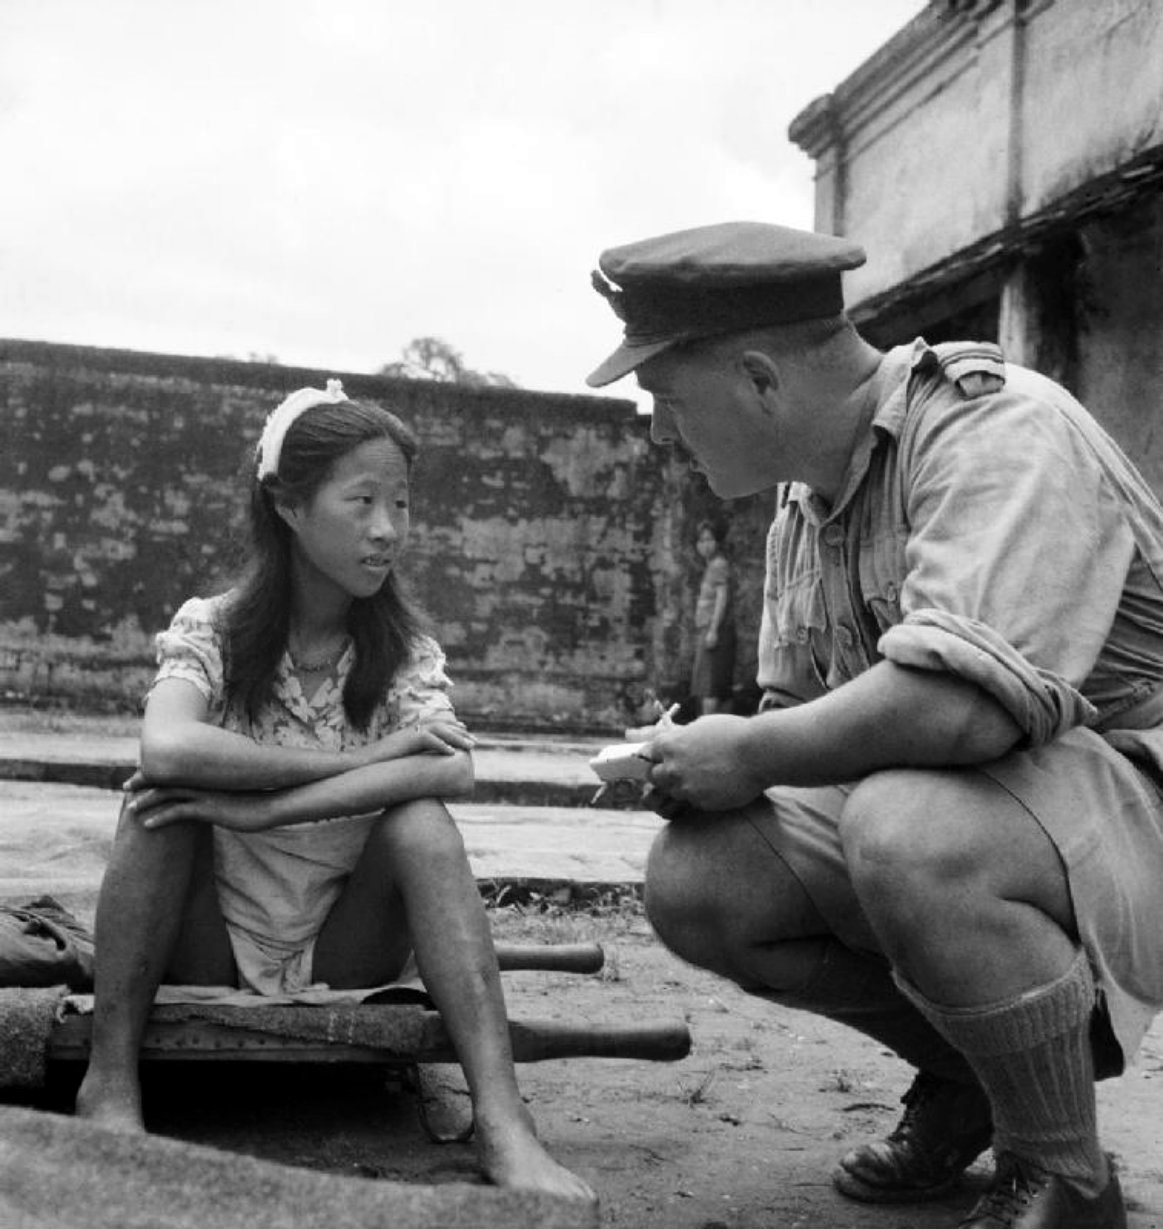 A young Chinese woman sits on a stretcher at a liberated “comfort station” as she is interviewed by a British Flying Officer of the Royal Air Force following the Allied victory in the Battle of Burma. 8 August 1945